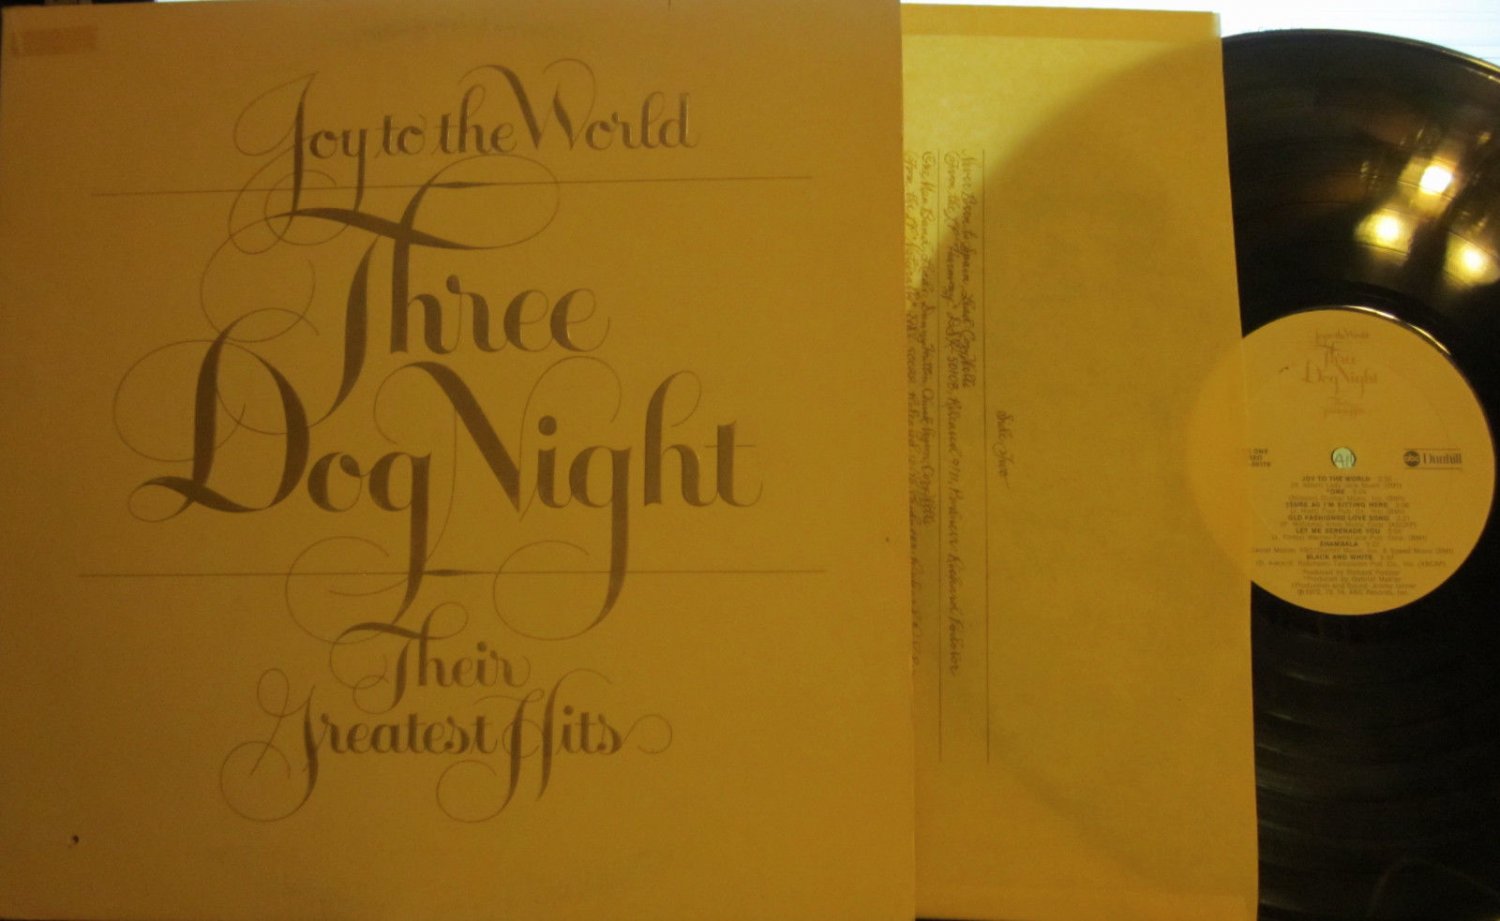 Three Dog Night - Joy to the World (Their Greatest Hits) (embossed ...